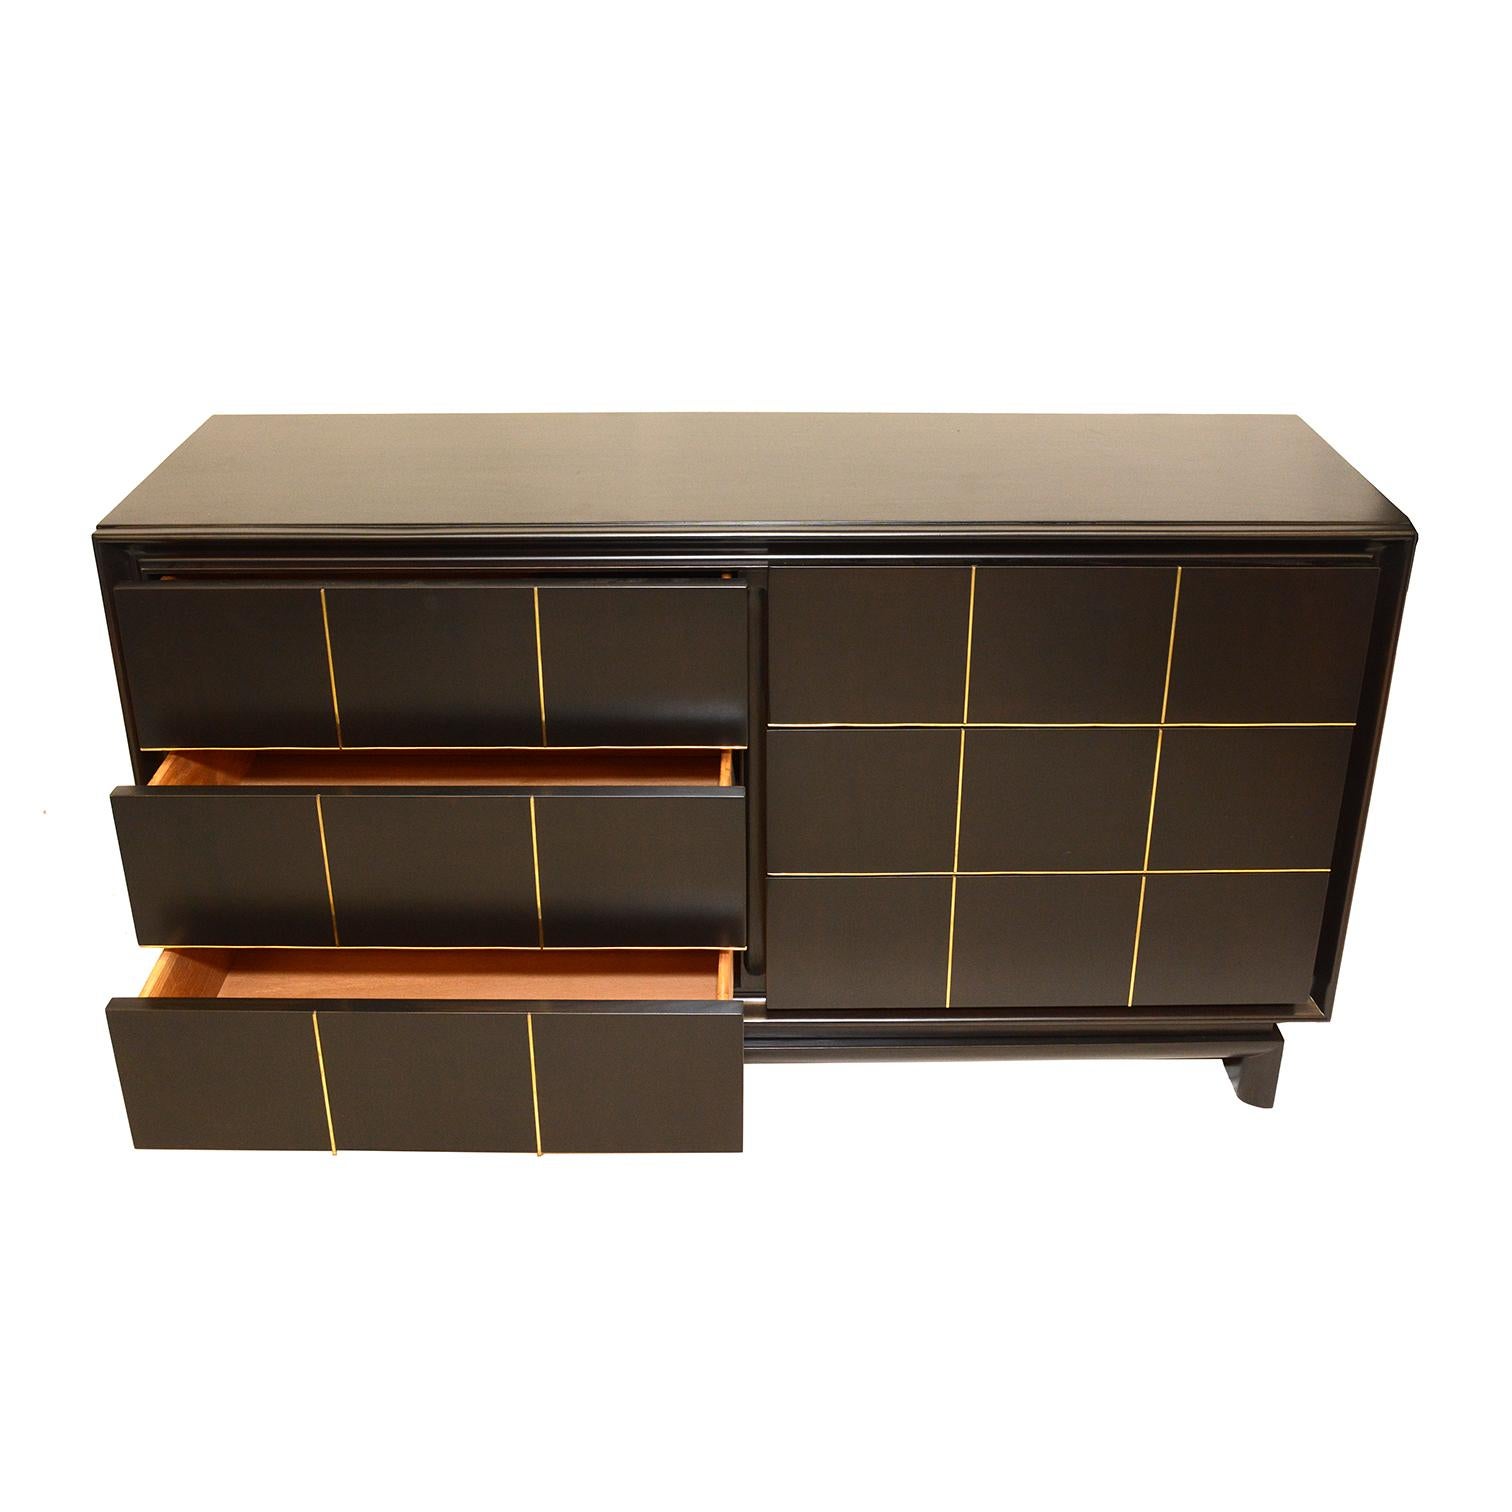 Merton Gershun for American of Martinsville. Gershun was a prolific designer of mid-century furniture credited with bringing darker woods into his classic designs. An impressive six-drawer ebonized mahogany low boy dresser. The piece is accented by